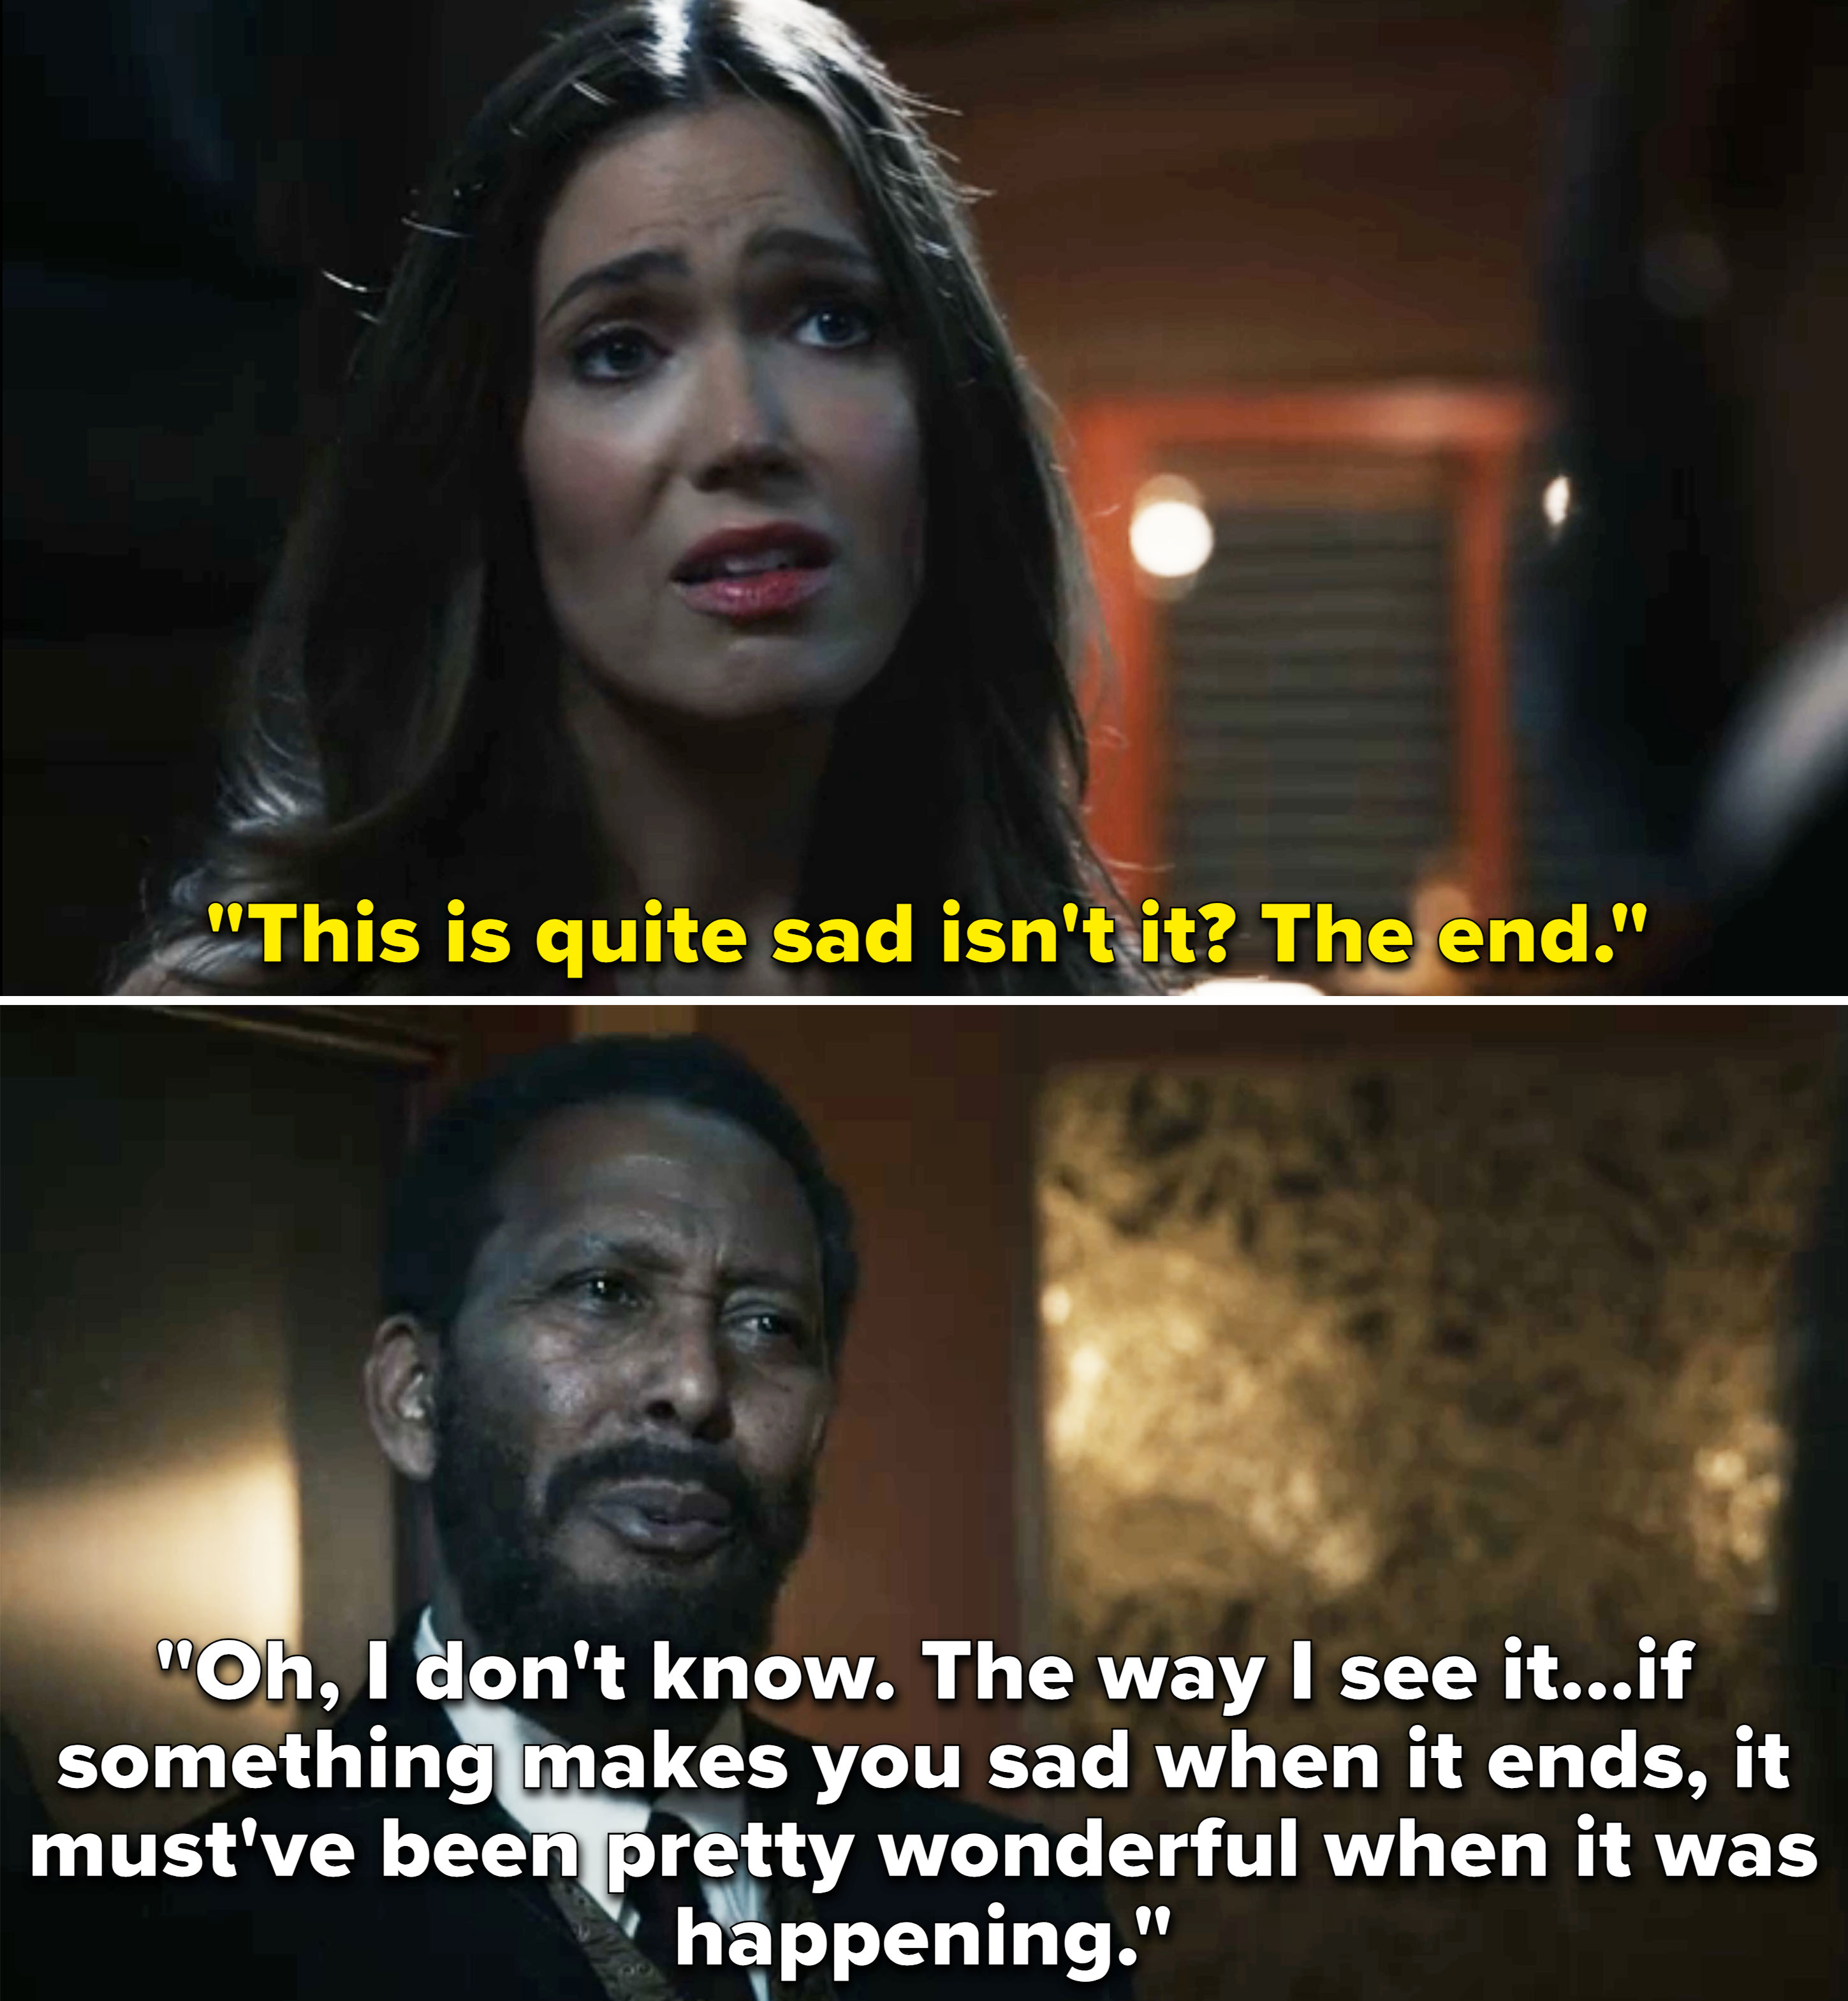 One character saying this is sad, and another saying if it&#x27;s sad because it&#x27;s ending, then it must have been wonderful while it was happening